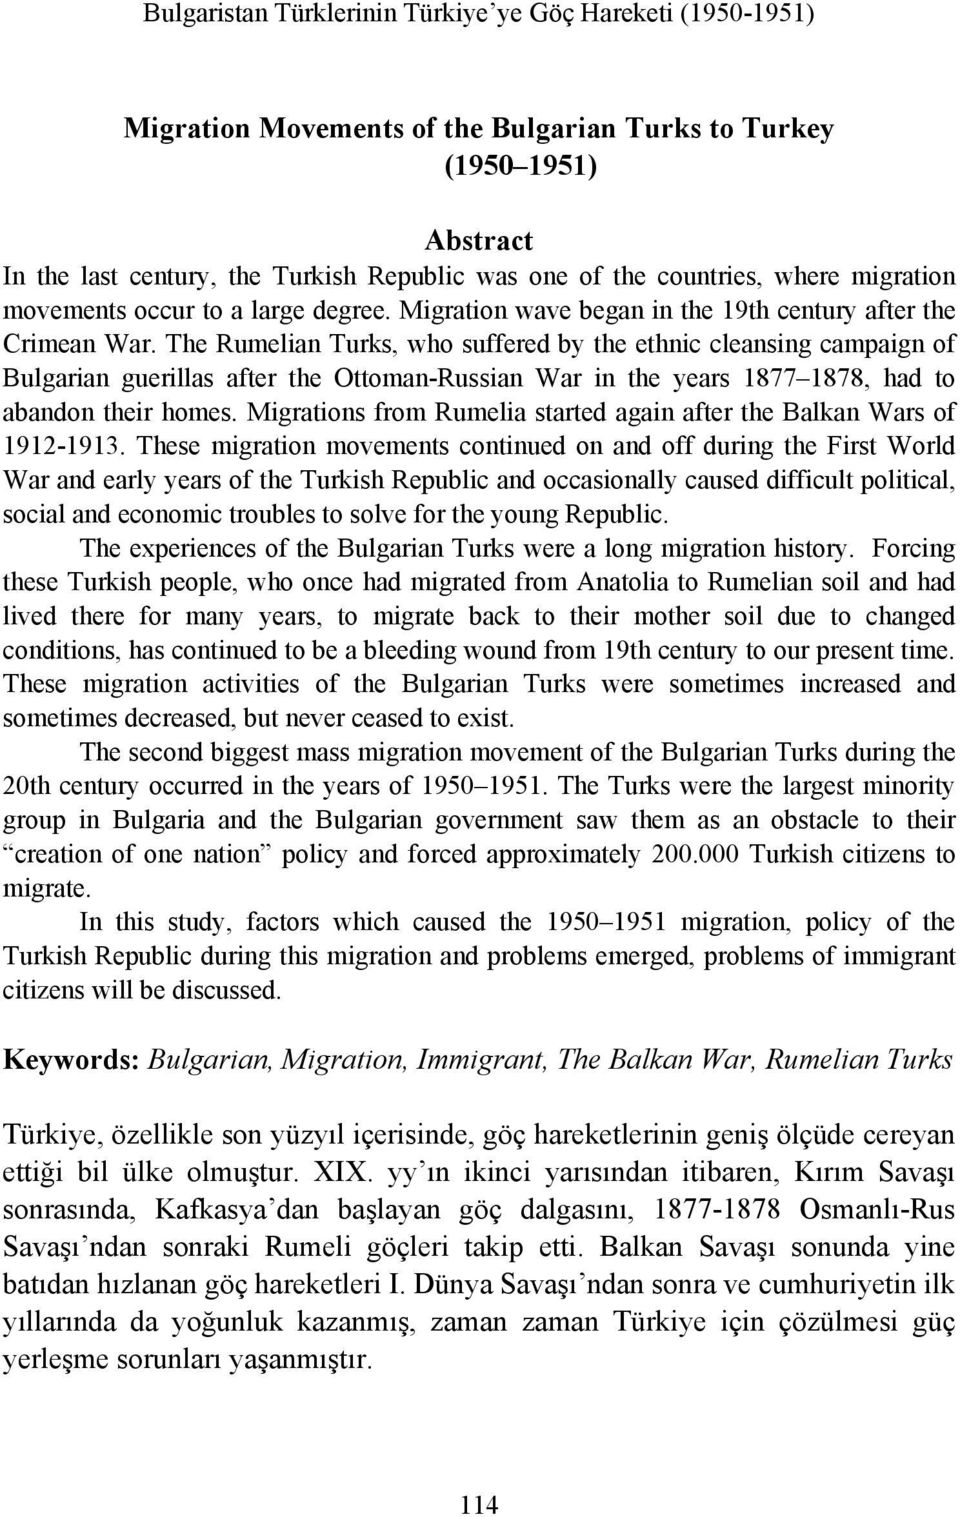 The Rumelian Turks, who suffered by the ethnic cleansing campaign of Bulgarian guerillas after the Ottoman-Russian War in the years 1877 1878, had to abandon their homes.